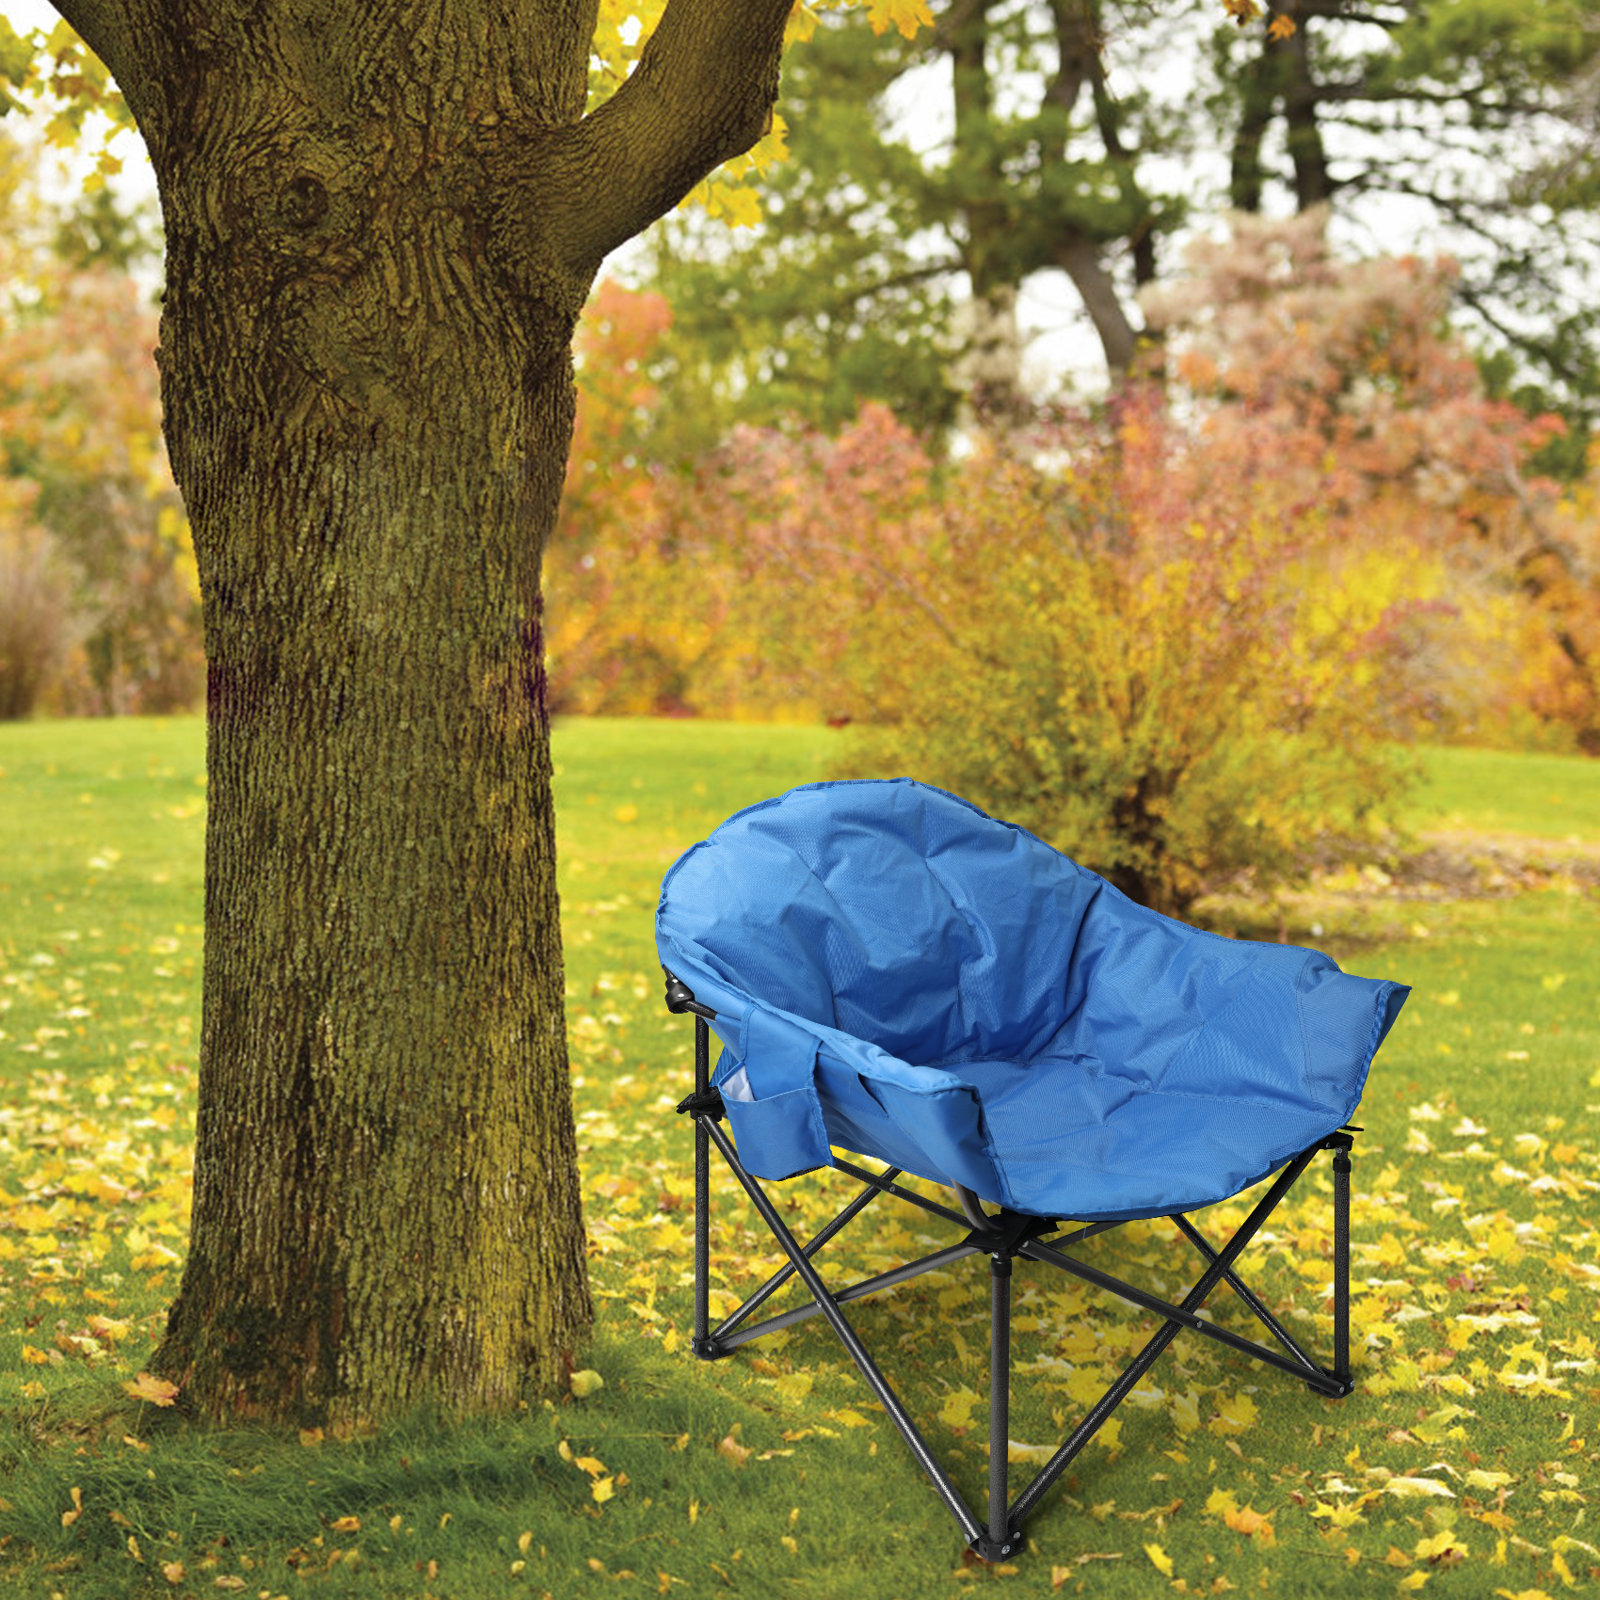 Arlmont & Co. Mccormick Folding Camping Chair & Reviews